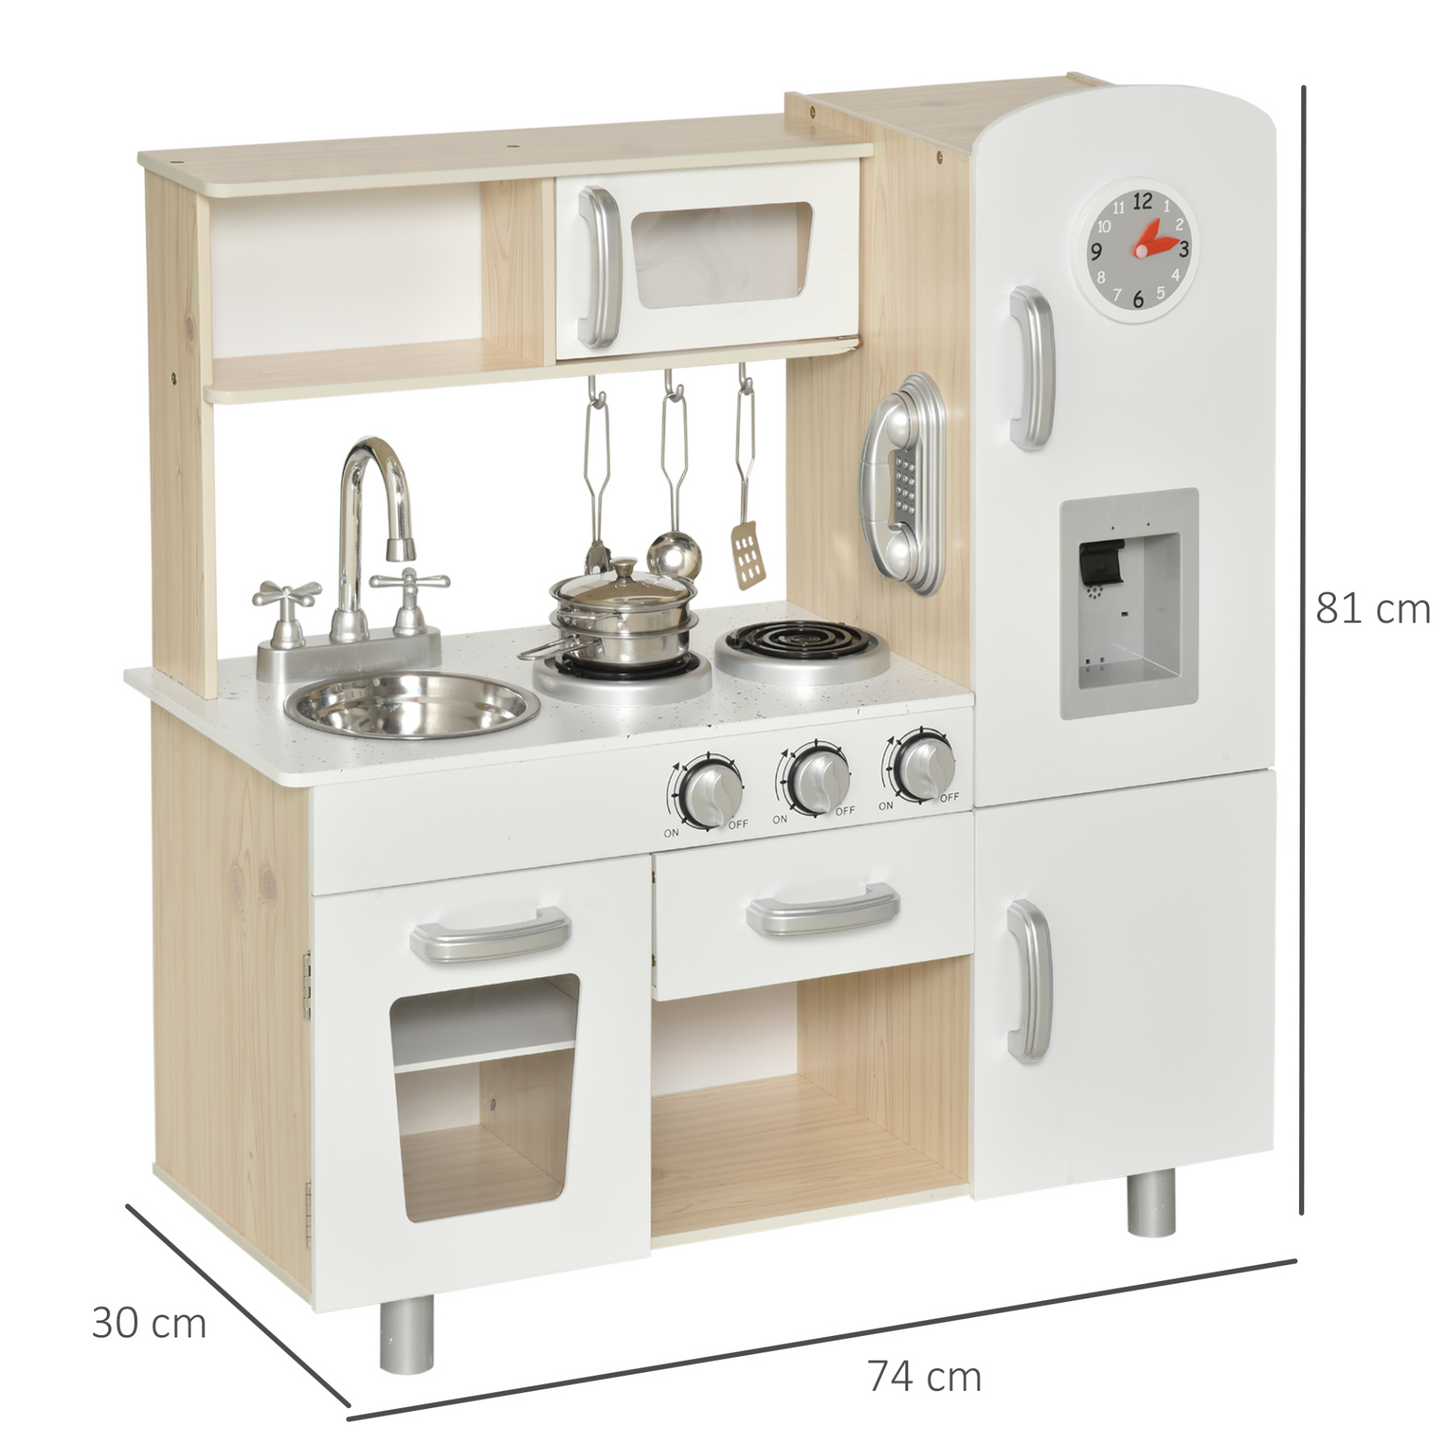 HOMCOM Kids Wooden Pretend Play Toy Kitchen Cooking Set Role Play Phone for Boys Girls White